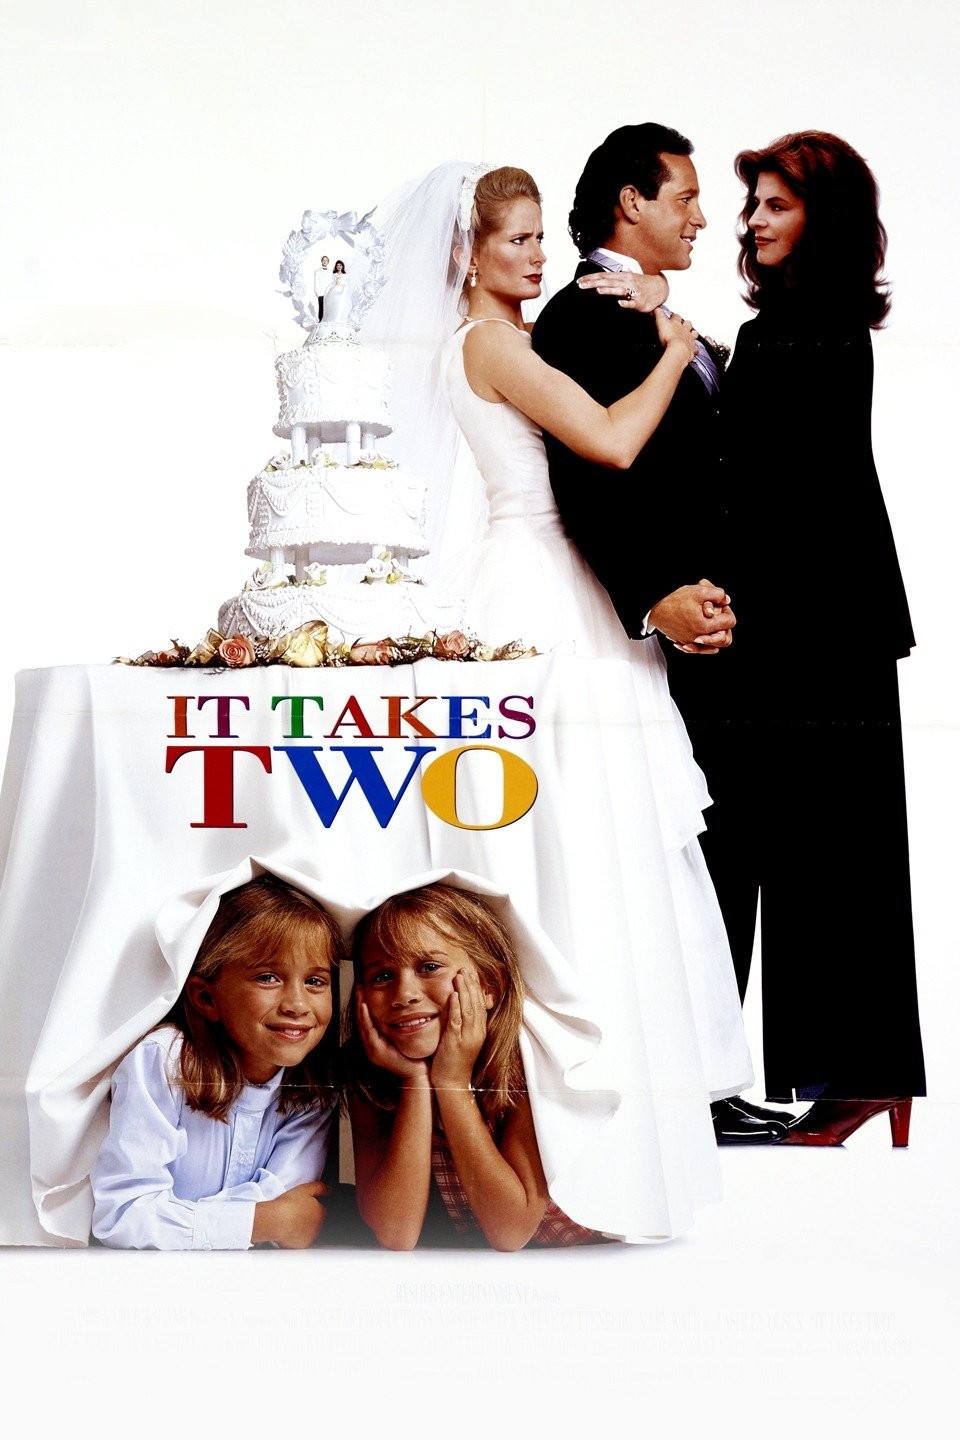 It Takes Two Deserves a Direct Sequel